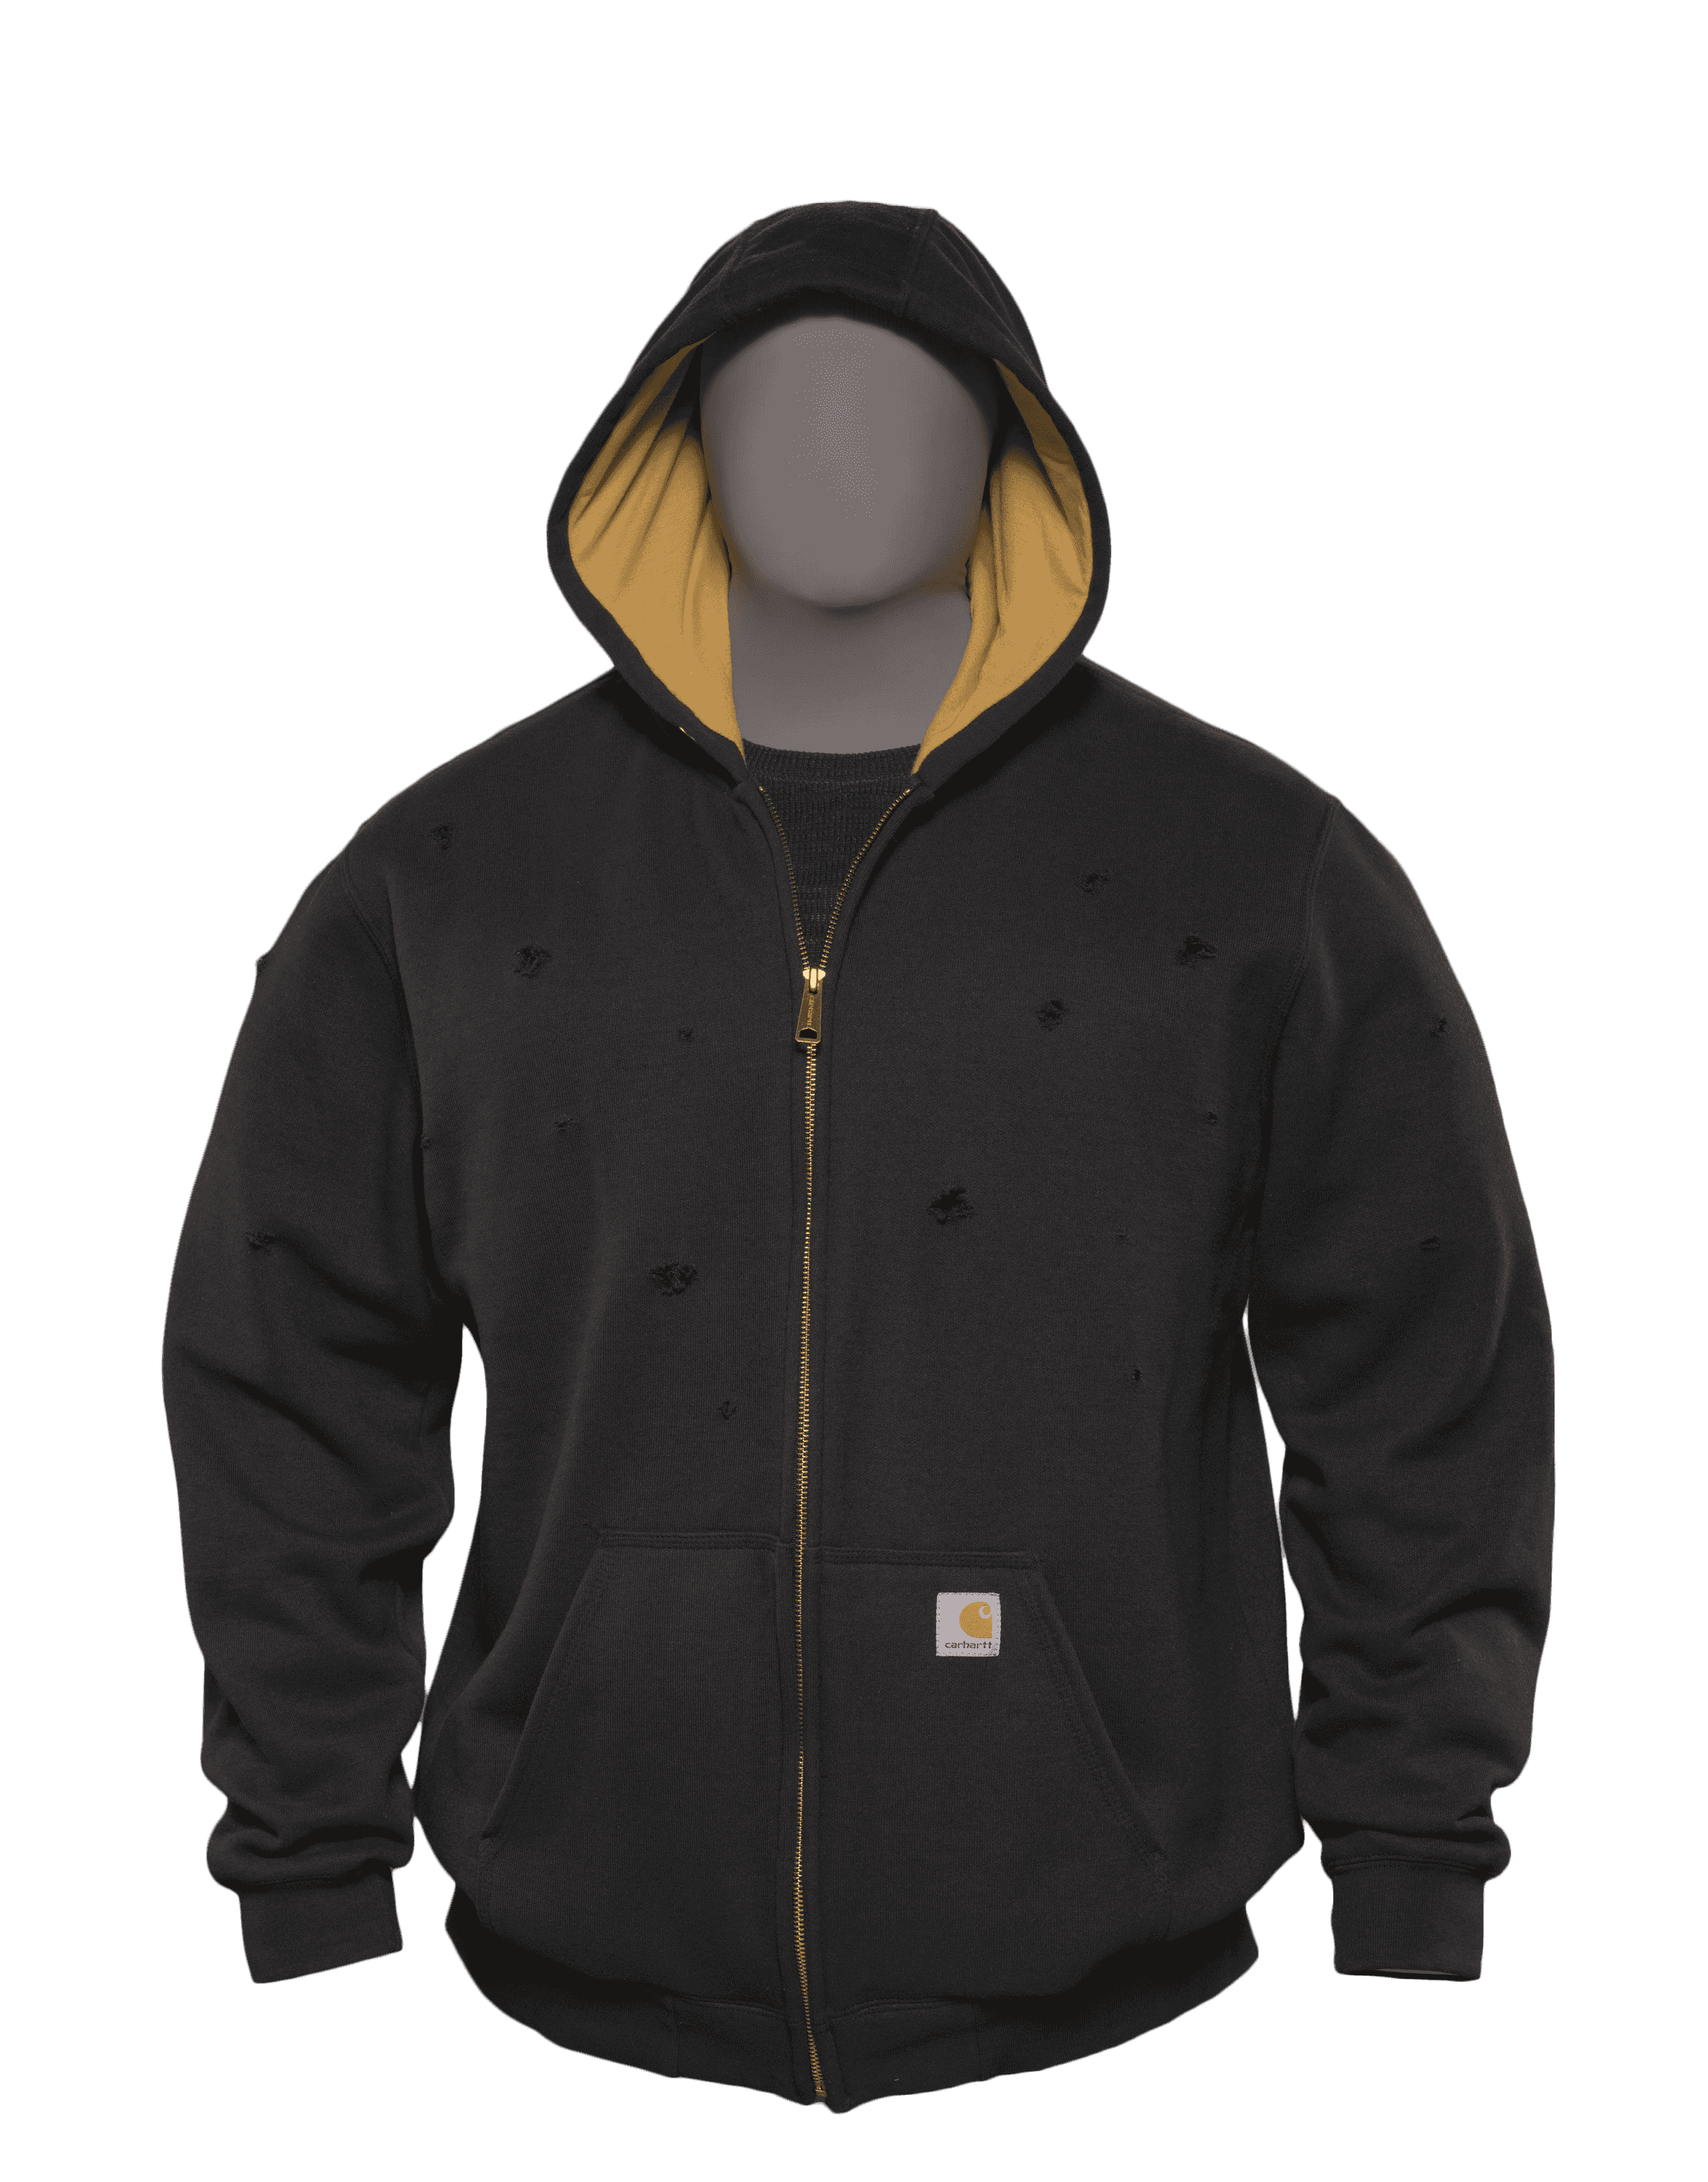 A black zip up hoodie with a yellow inner line worn by Luke Cage in the "Crispus Attucks" scene